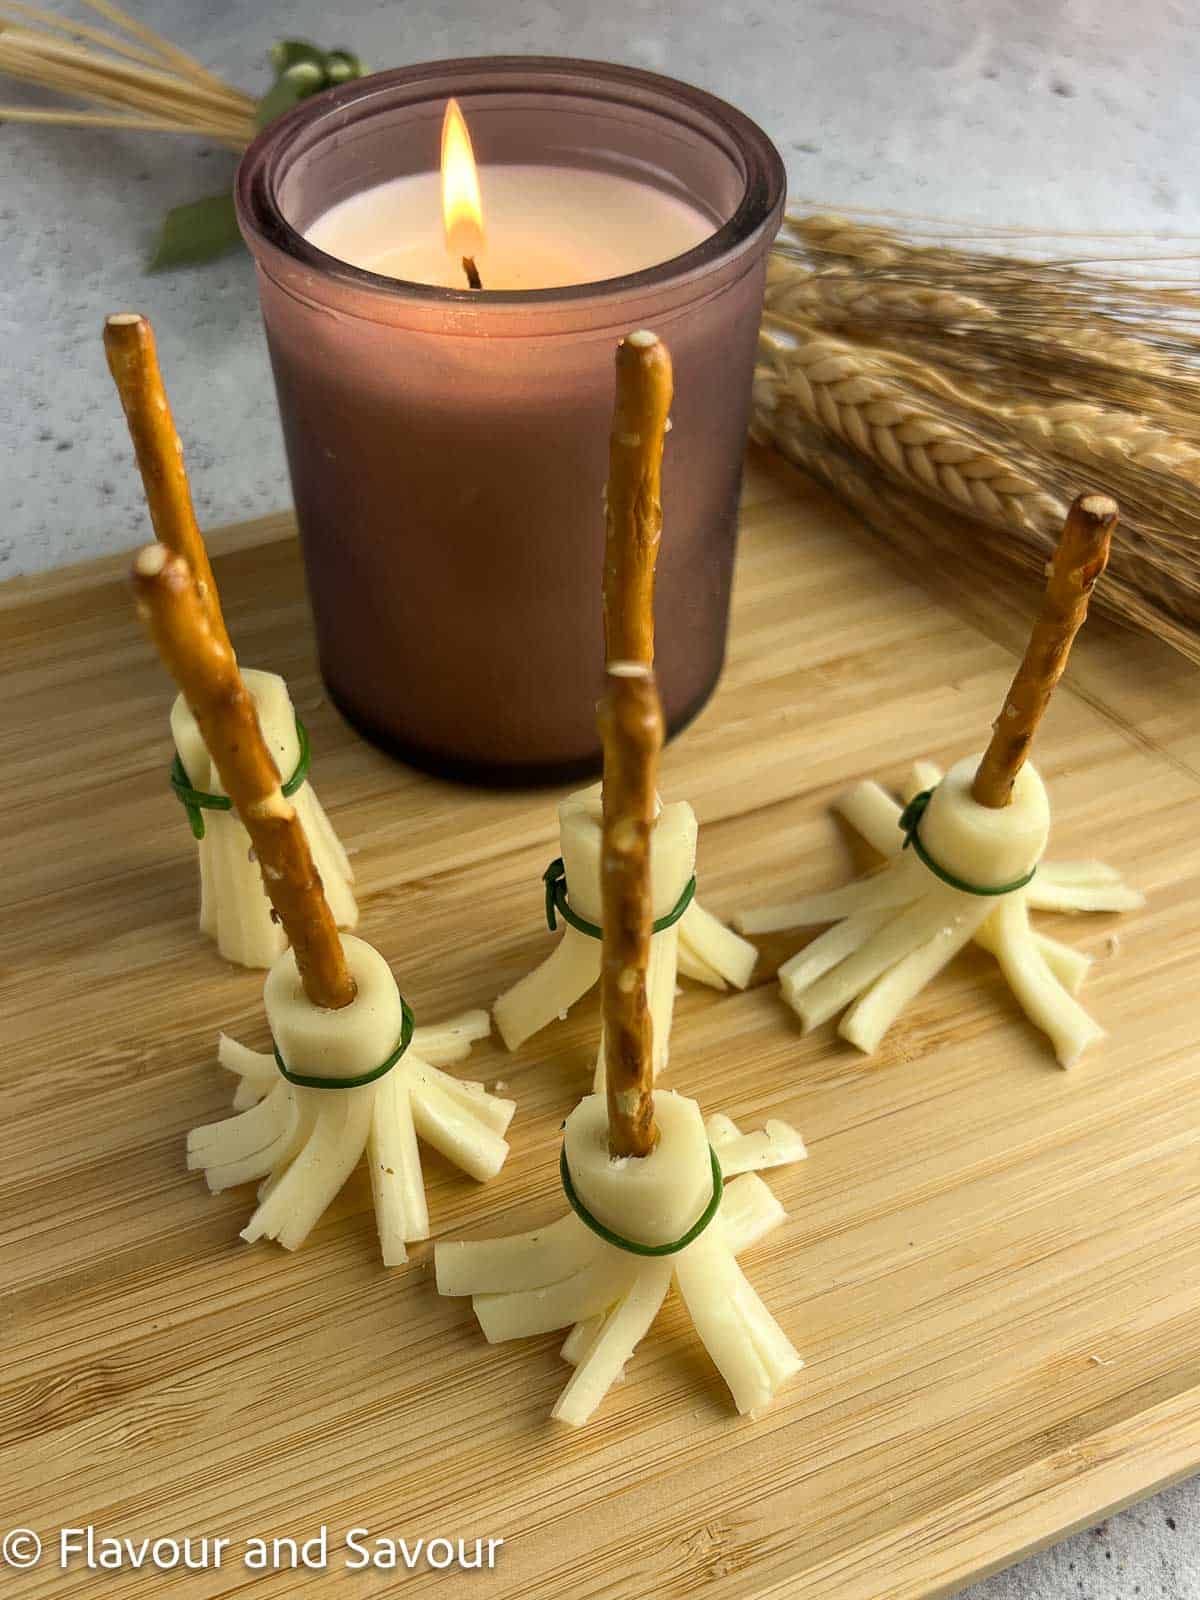 Witches' broomsticks snacks standing upright next to a candle.